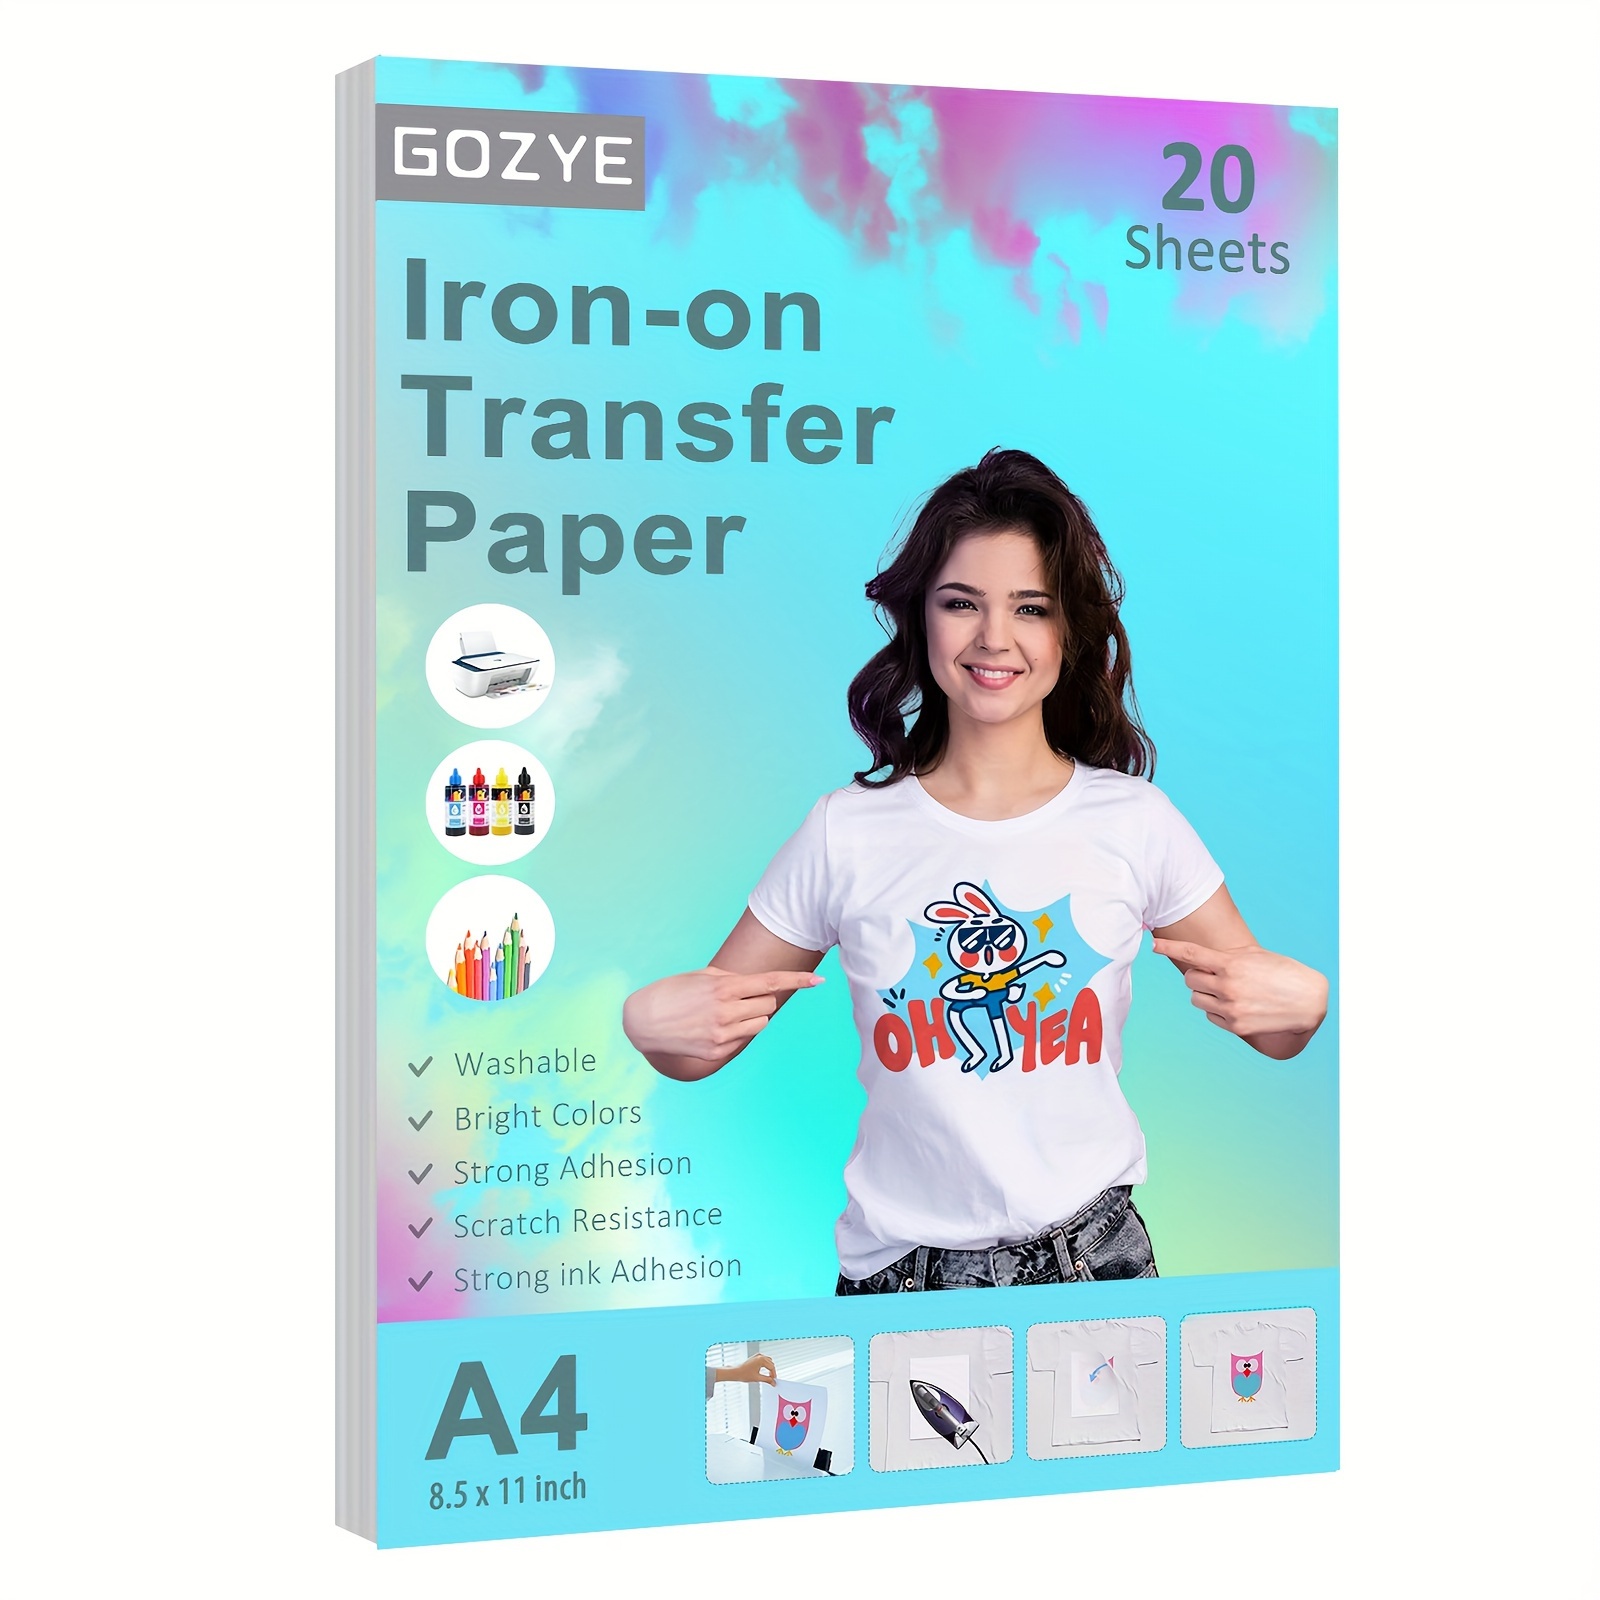 TransOurDream Iron on Heat Transfer Paper for Laser & Inkjet Printer, 8.5x11 inch, 20 Sheets for Light & White T-Shirts, Size: 8.5 x 11